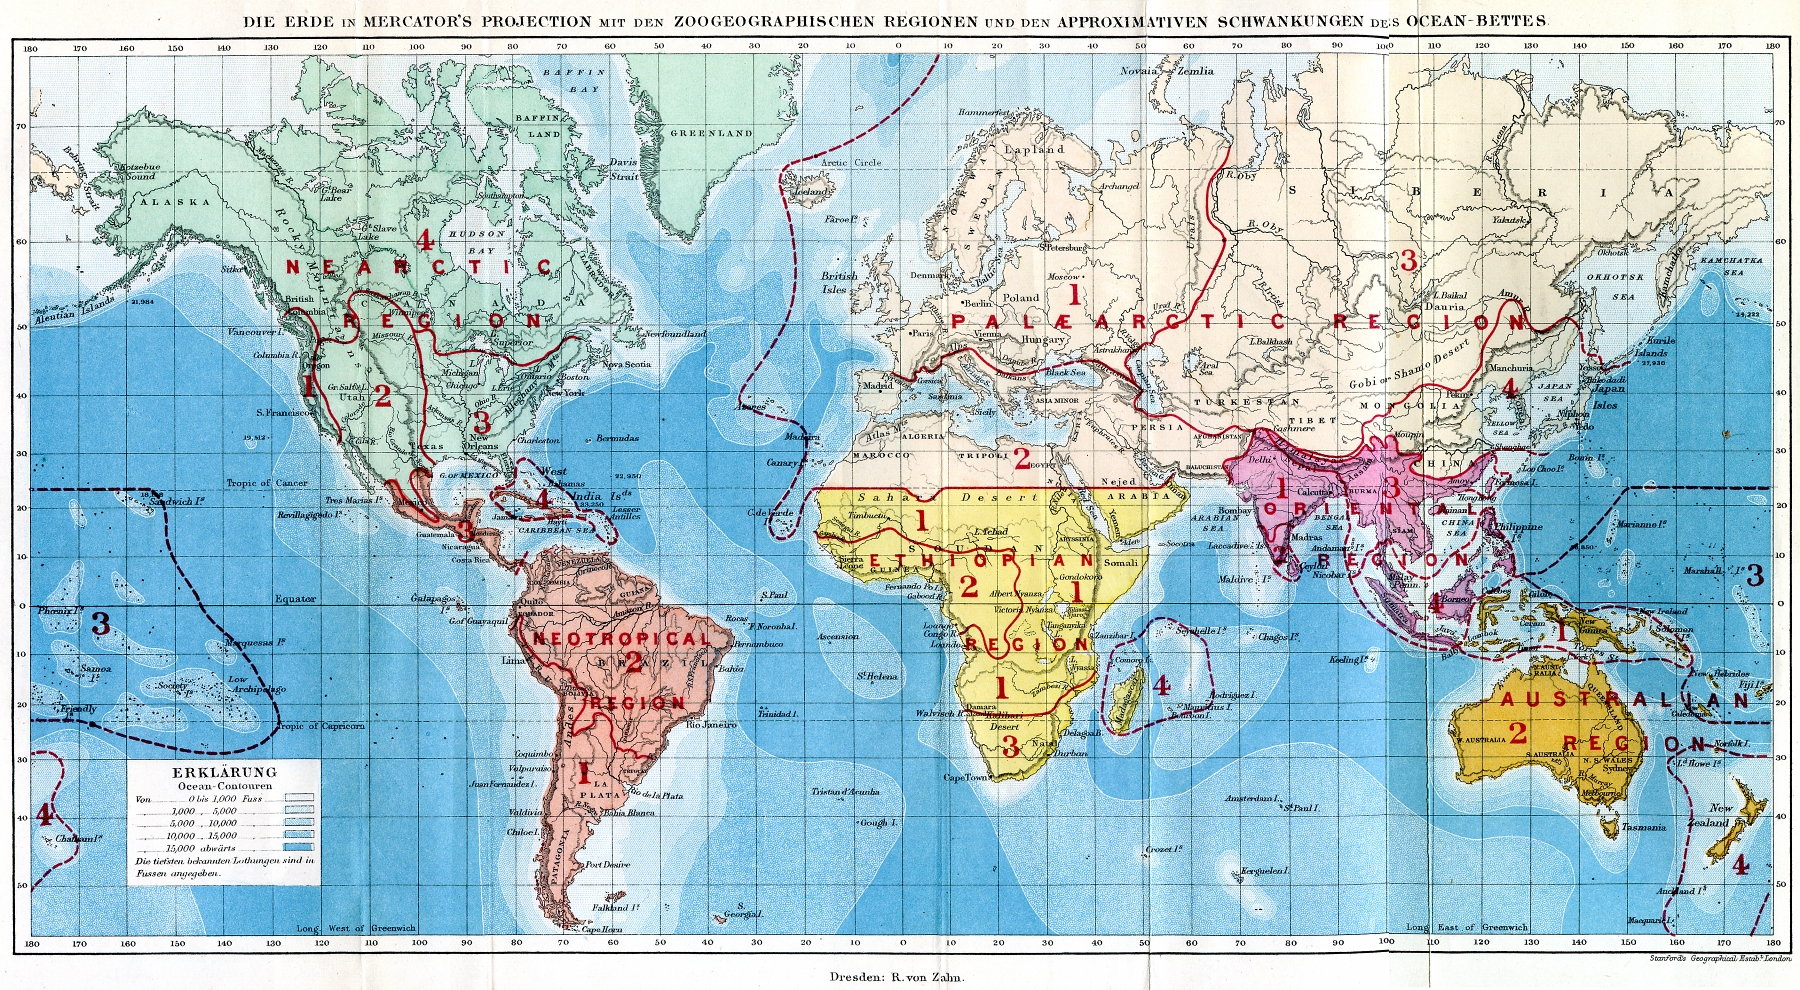 Zoogeography - Realms, Theories pertaining to distribution of animals